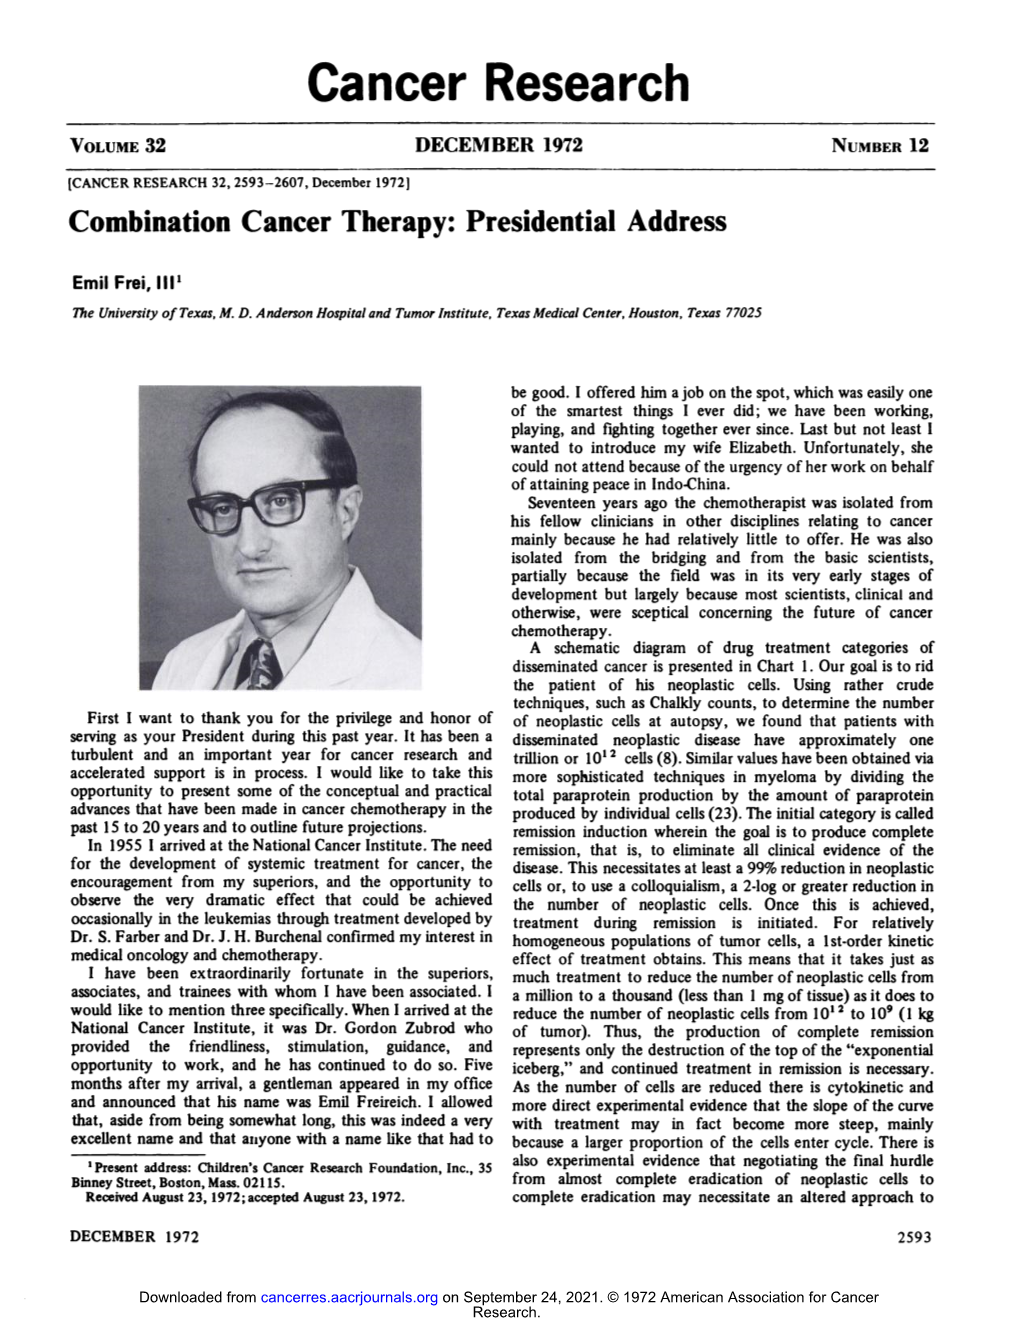 Combination Cancer Therapy: Presidential Address